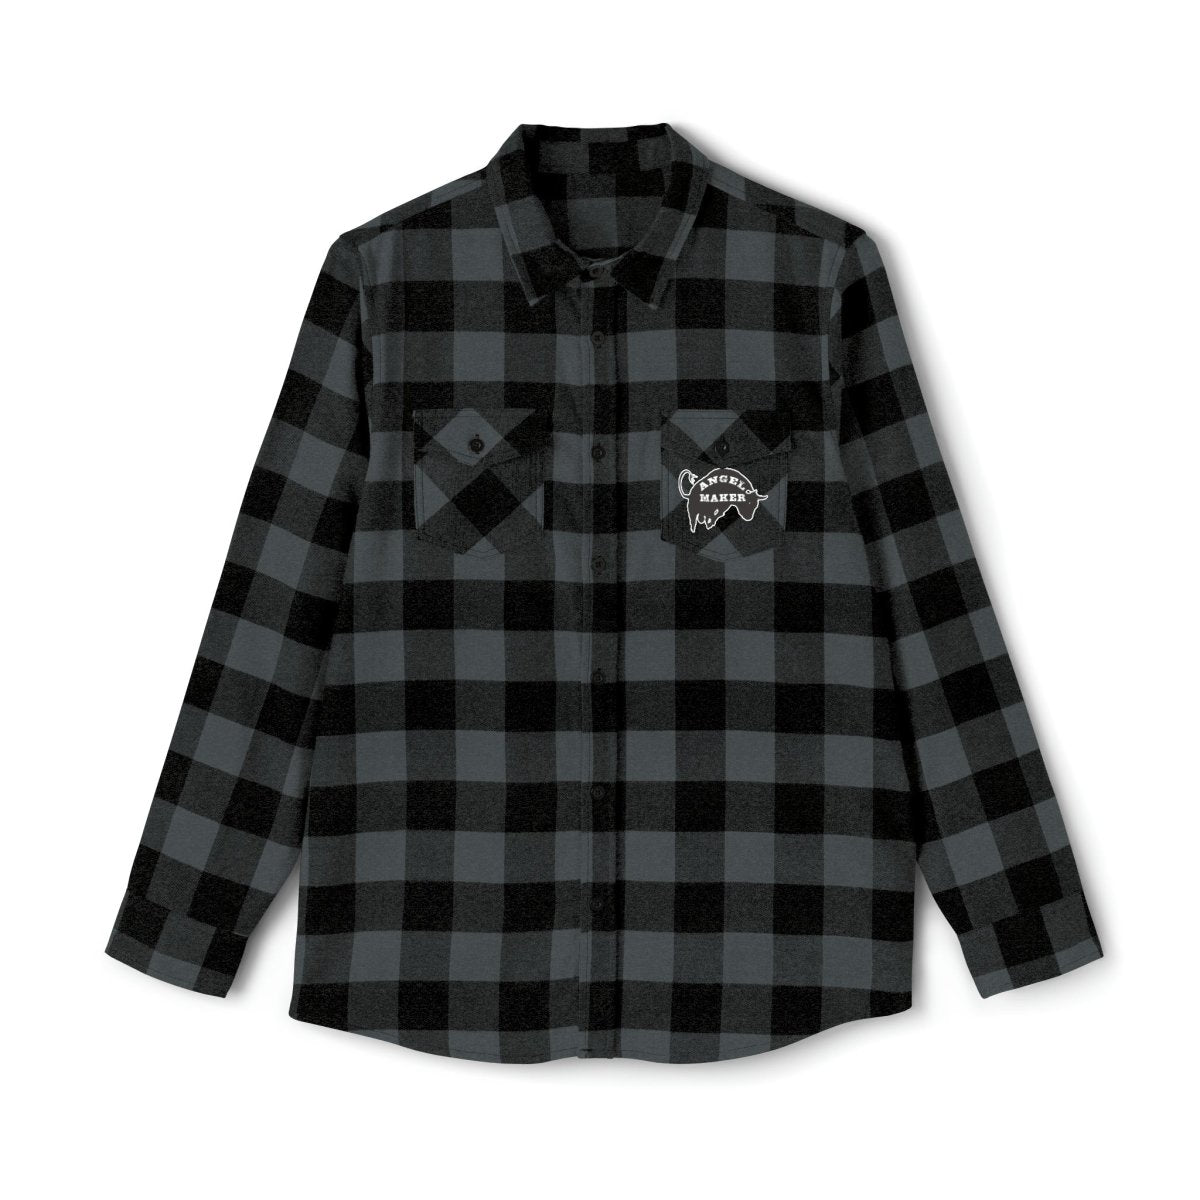 Montgomery Rodeo Angel Soft Flannel Shirt, Bucking Bull Ride, Hold On, Keep Going Inspiration